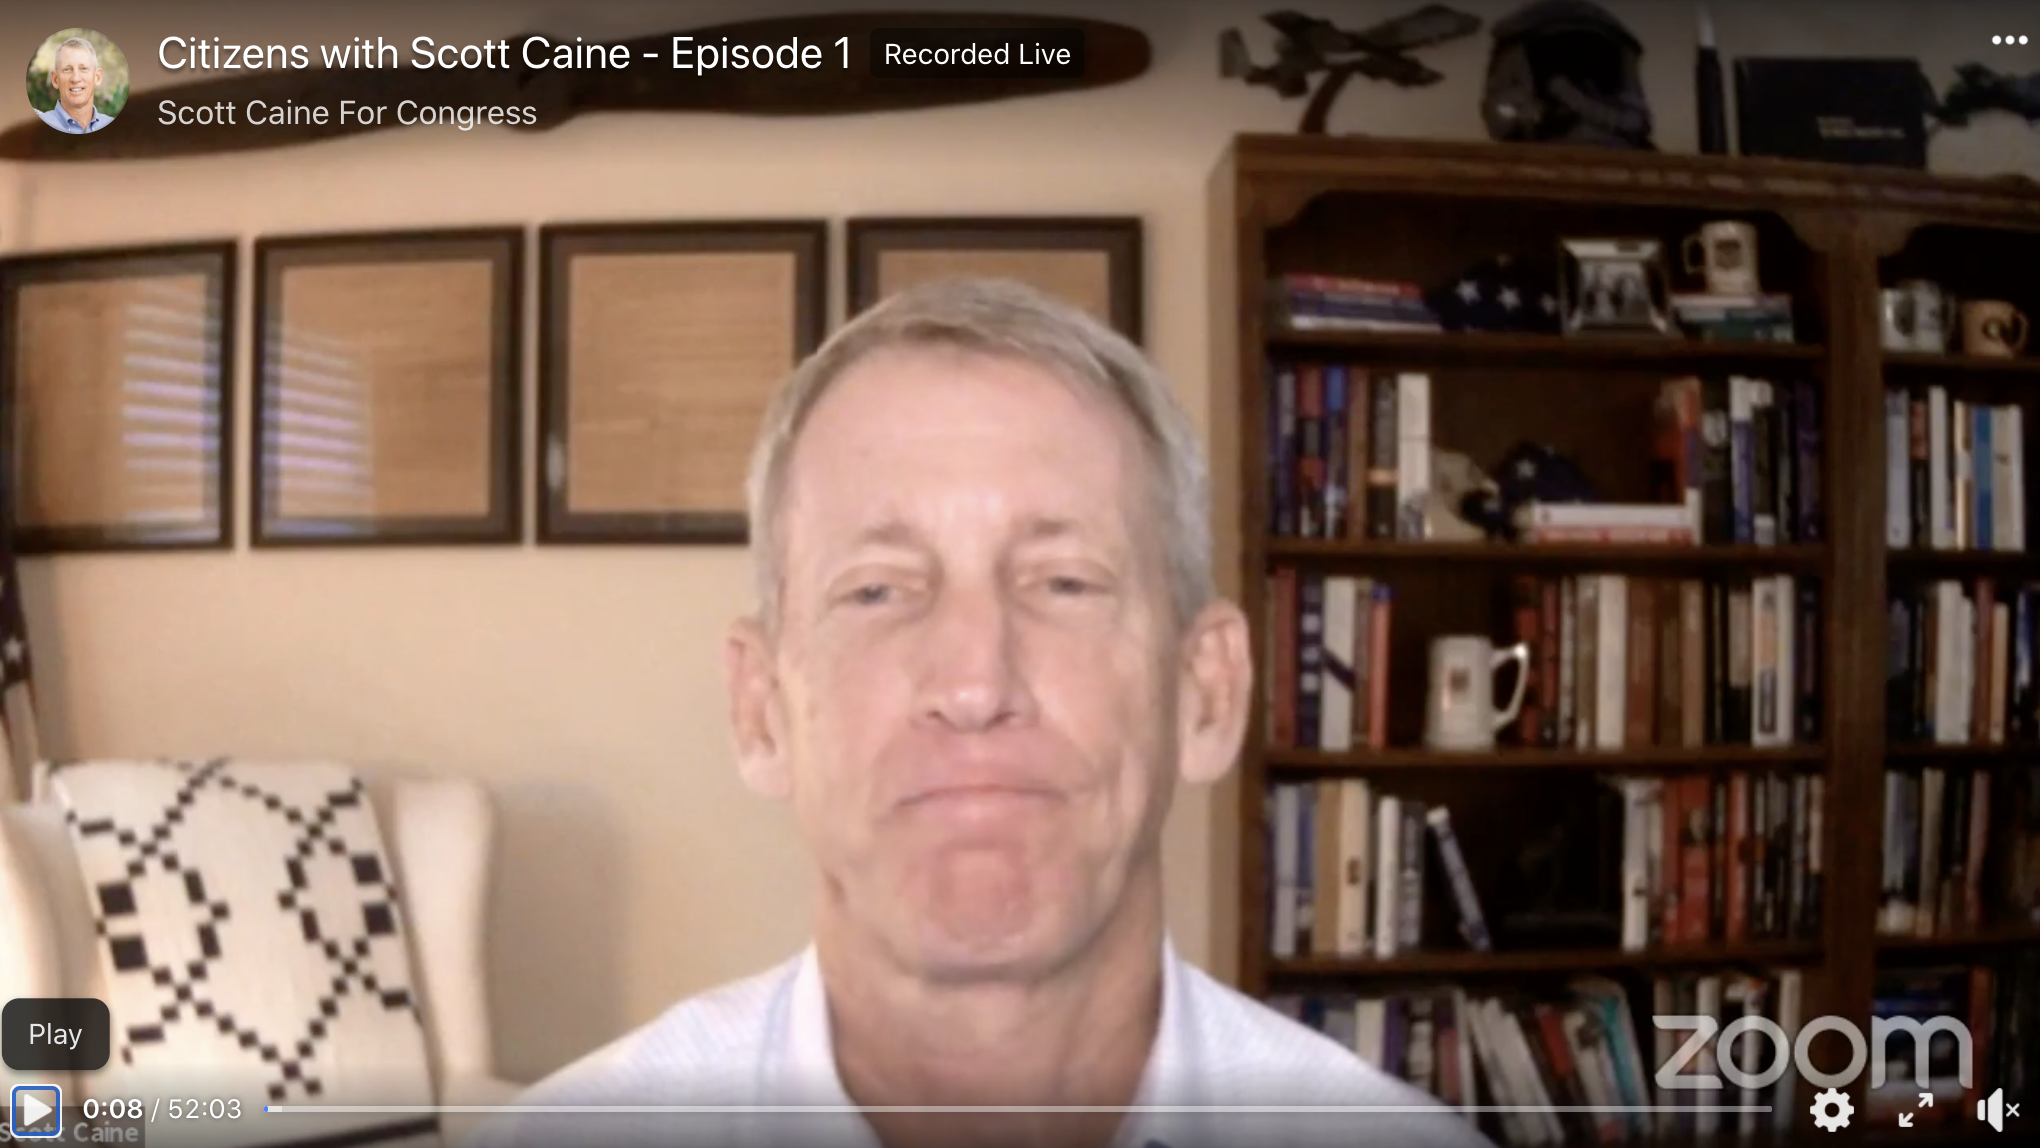 Col. Scott Caine has a conversation about the millennial mindset, education, student debt, and the global economy.